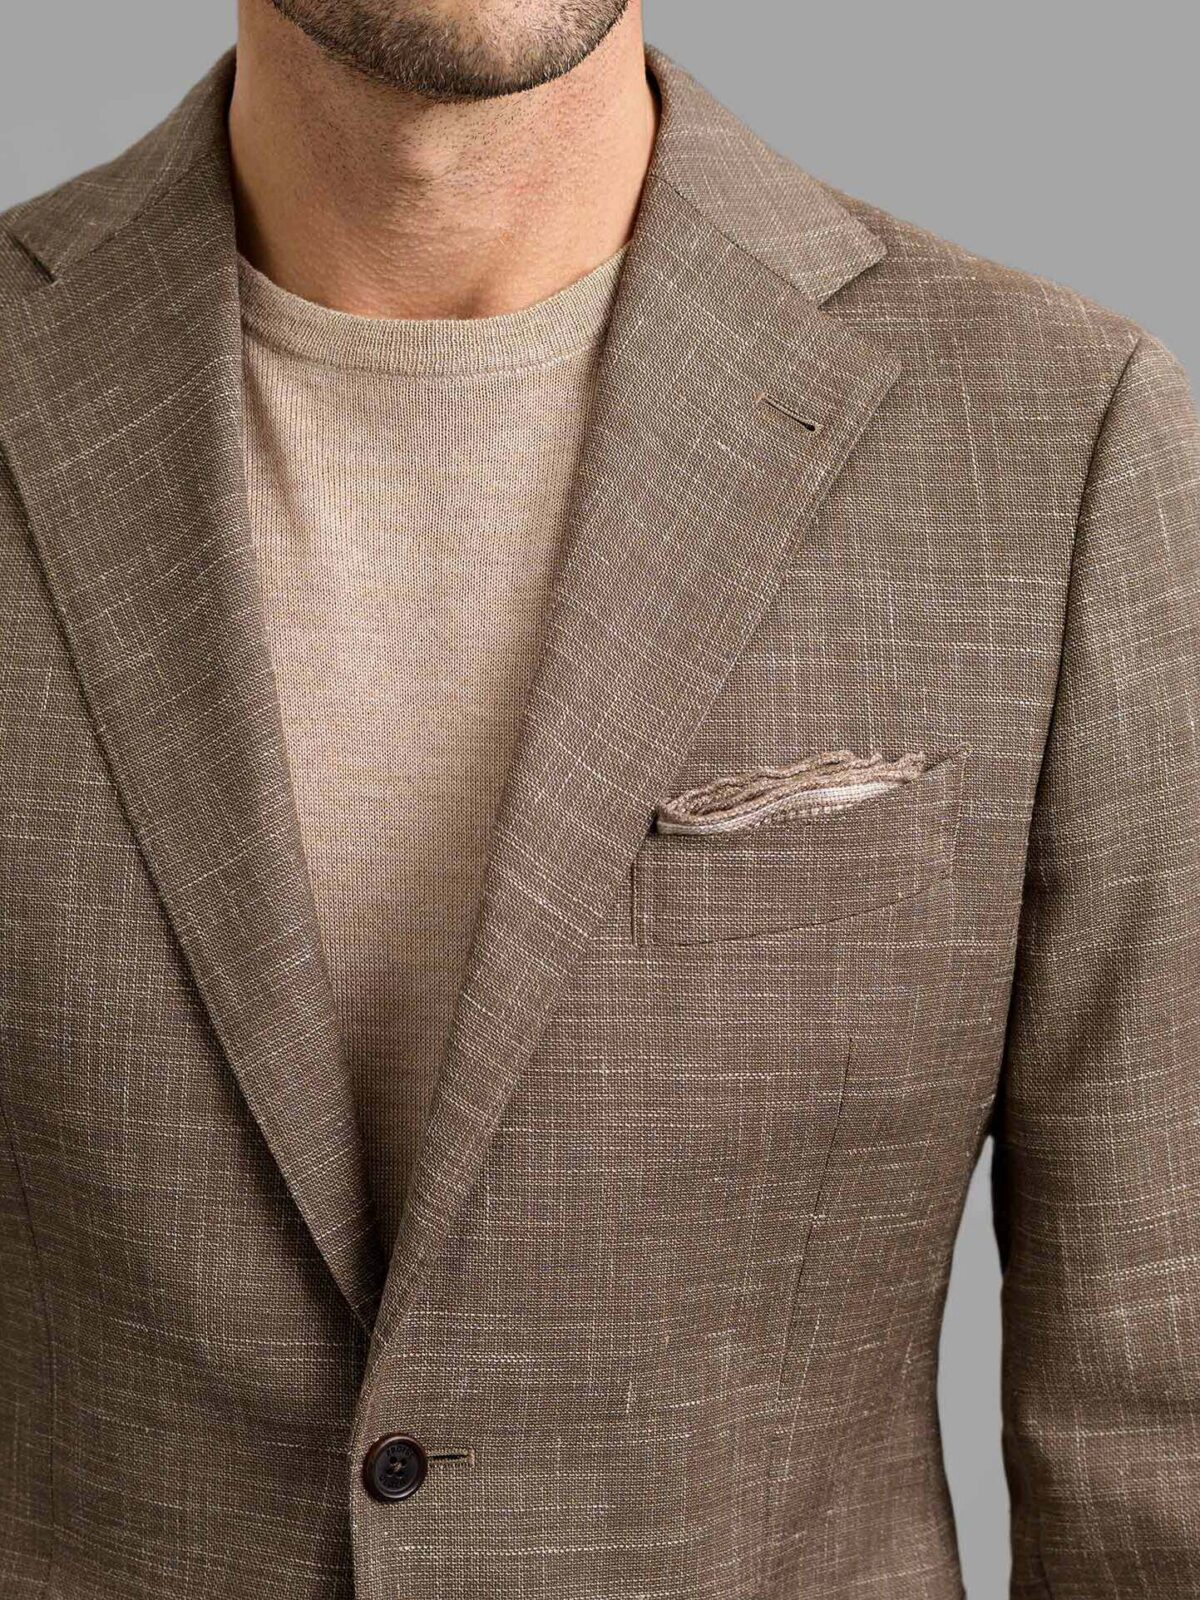 Mocha Wool and Linen Stretch Clothing Fit Tailored Bedford Jacket Custom 